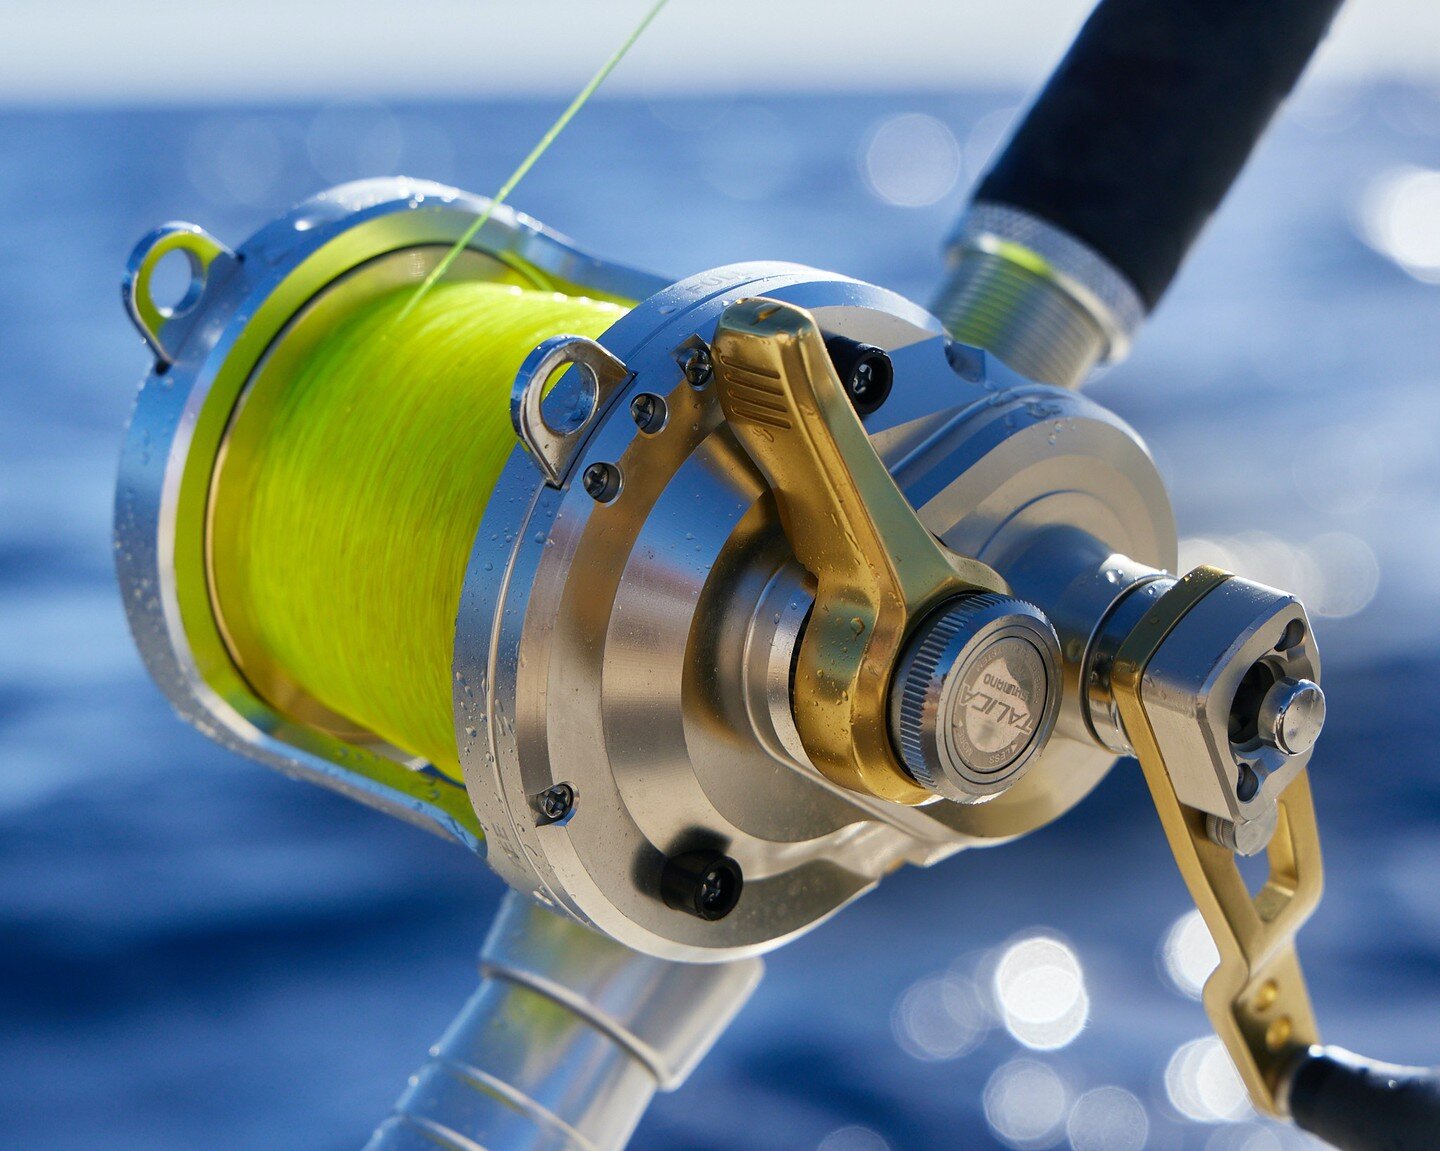 Love the look and feel of these fishing reels by Shimano. 

#gonefishing #advertisingphotographer #miamiphotograpeher #lovemyjob #shimano_fishing_reels
#georgekamper #travel #miami #commercialphotographer #tandemshooting #piggybackingonvideo #miamiph